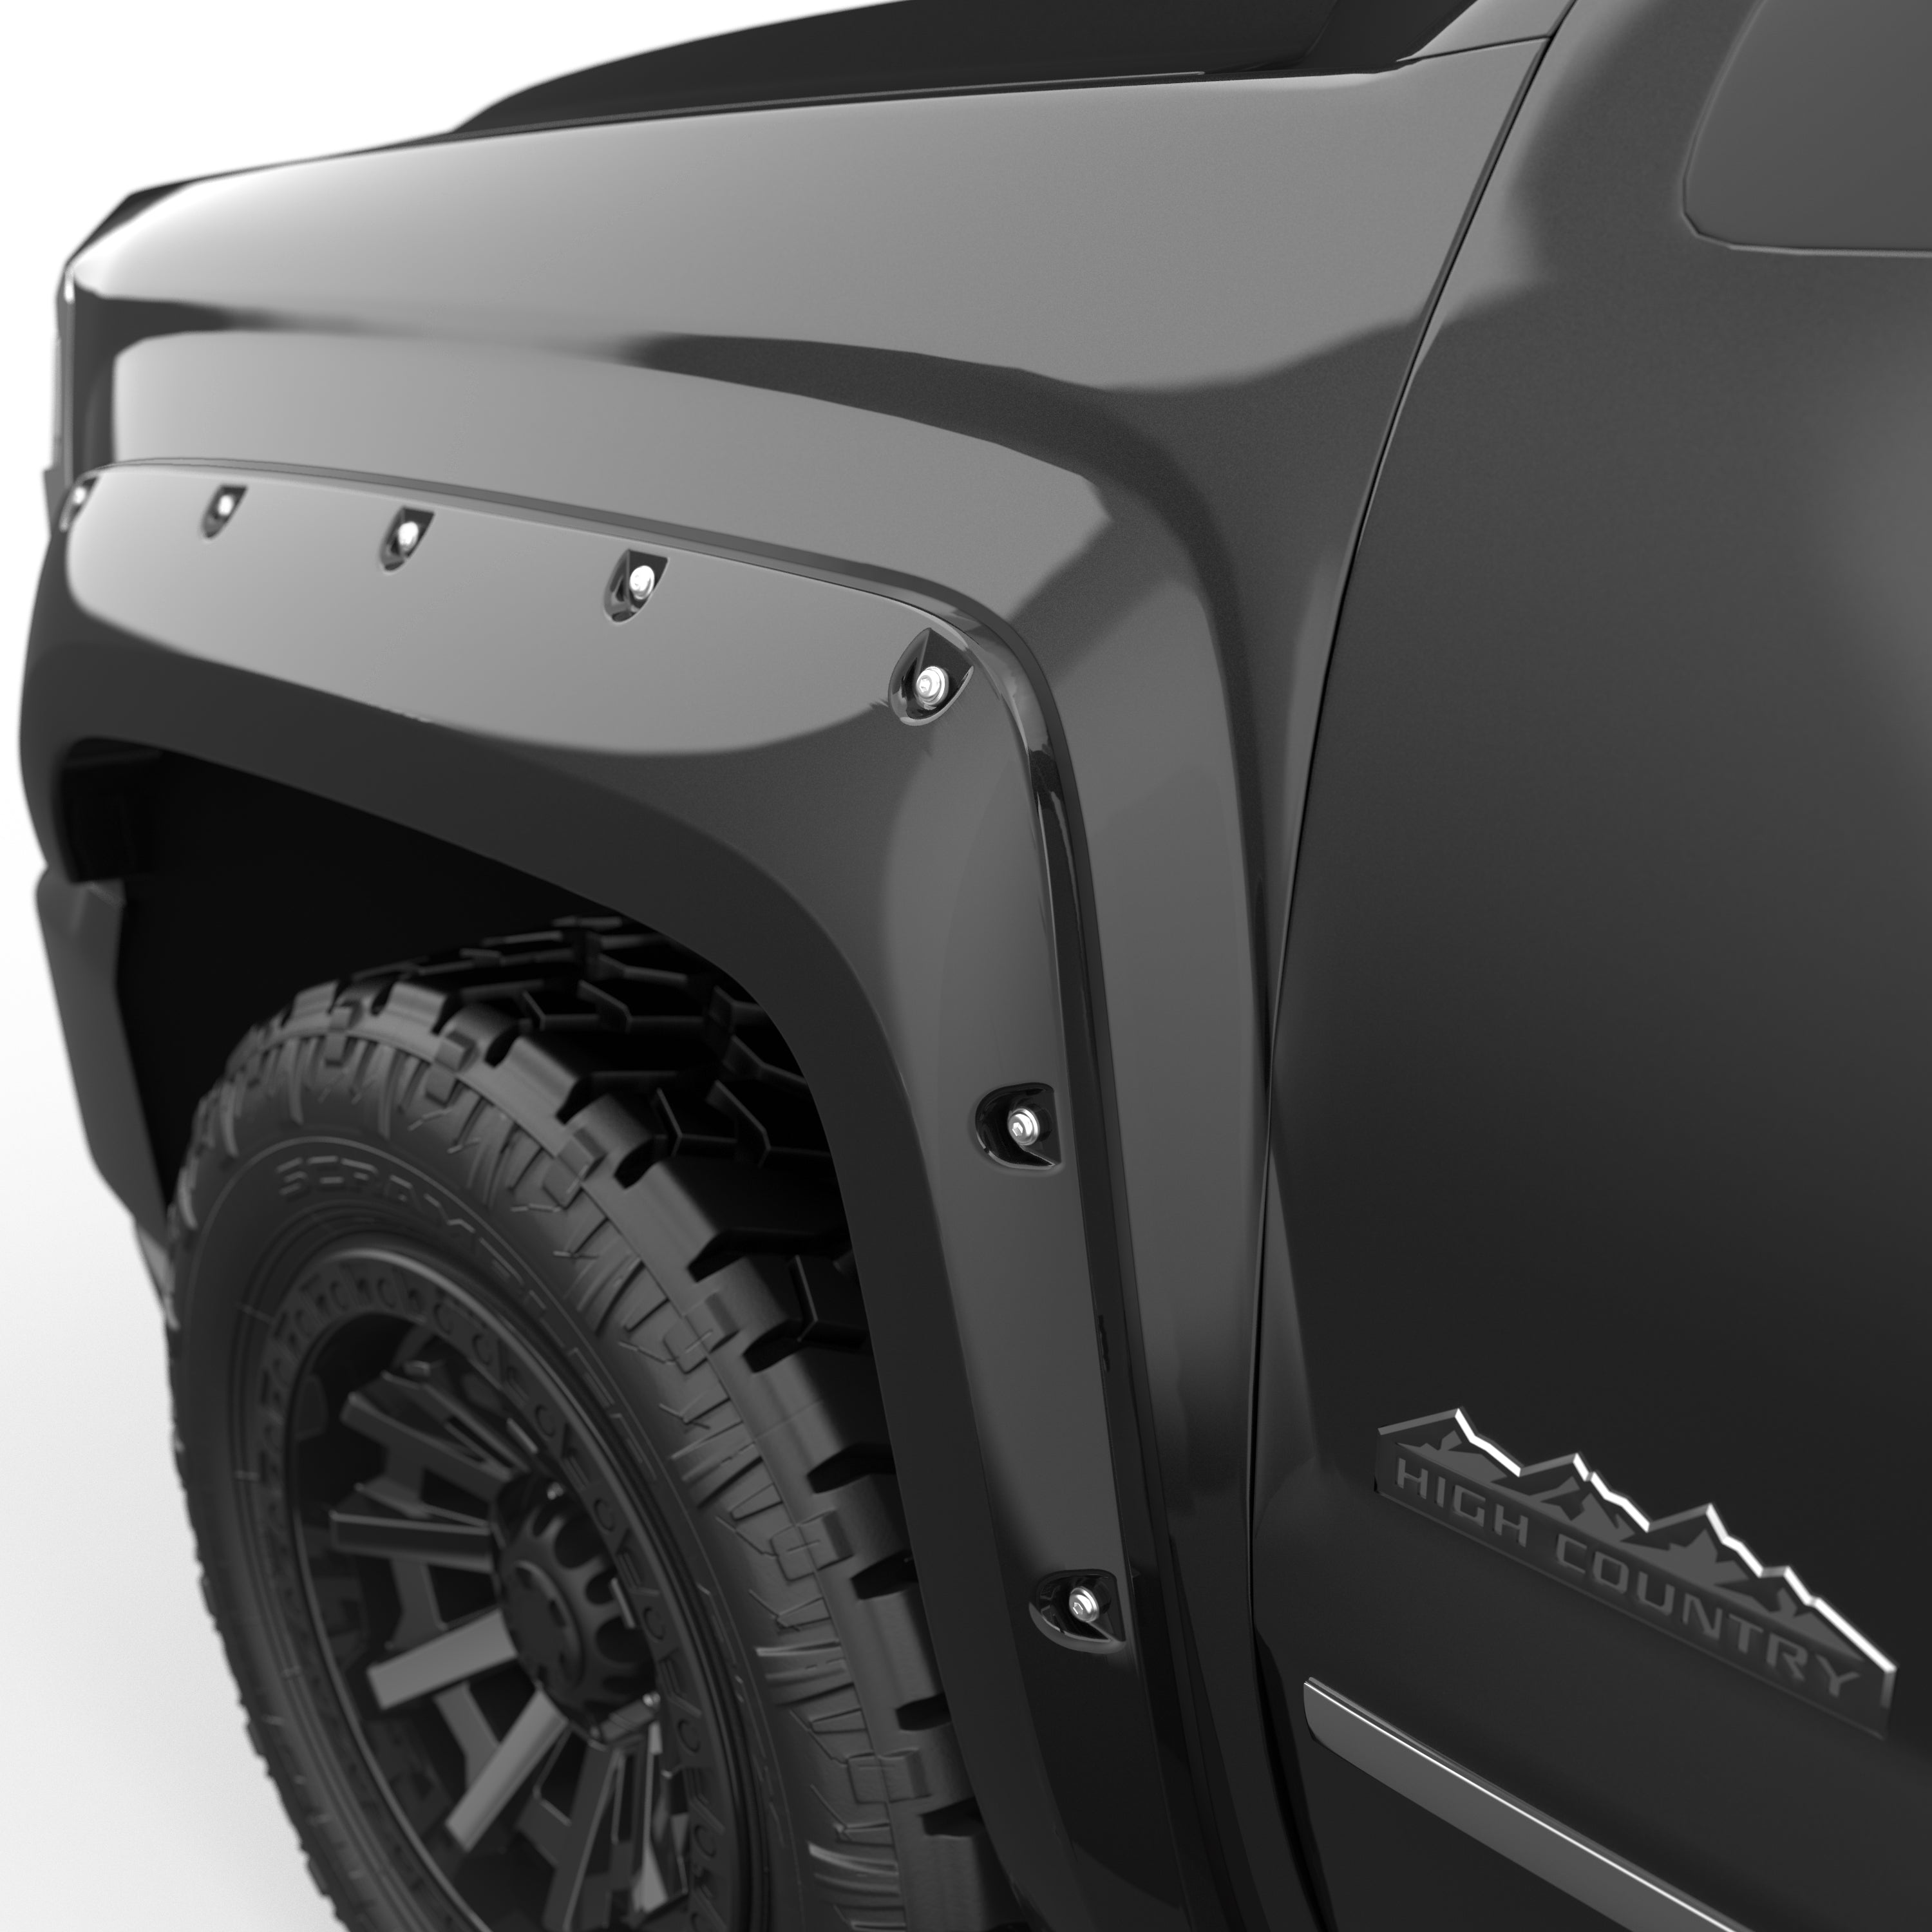 EGR 2014-2018 Chevrolet Silverado 1500 2015-2019 2500 3500 HD 2 & 4 Door Traditional Bolt-on look Fender Flares set of 4 Painted to Code Black 791574-GBA